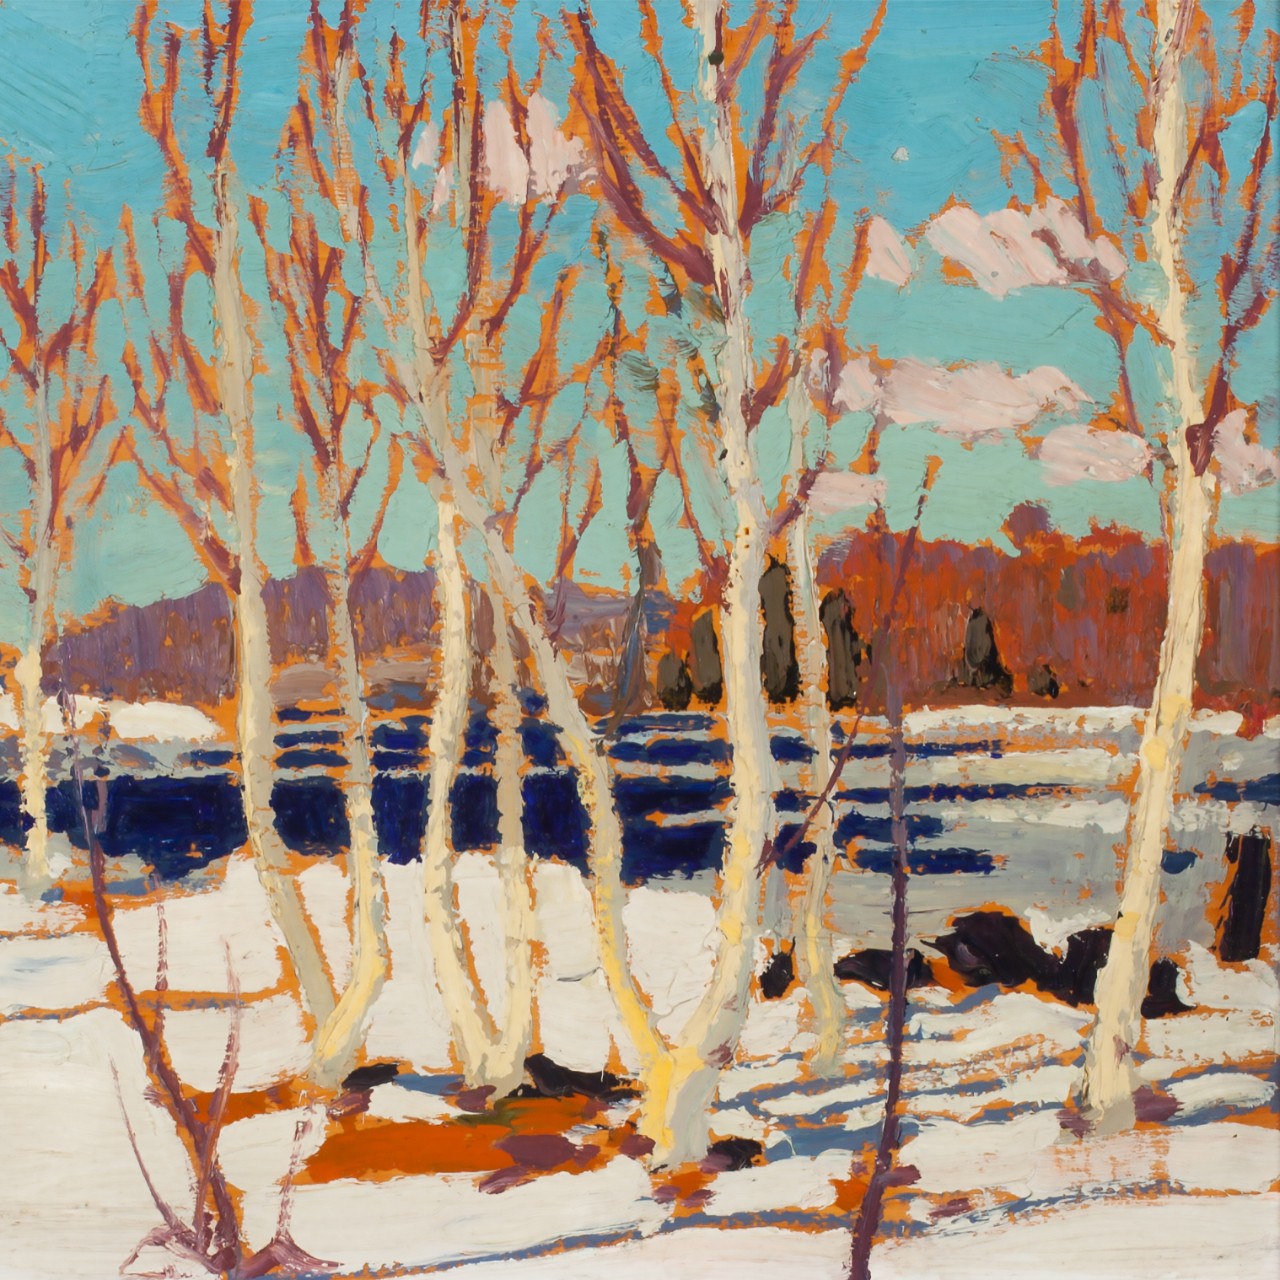 Tom Thomson (1877-1917). "April in Algonquin Park" (detail), 1917. Oil on wood panel, 21.5 x 26.6 cm. Collection of the Tom Thomson Art Gallery, Owen Sound Ontario, gift of George Thomson, brother of Tom Thomson, 1967. Photo: Michelle Wilson.